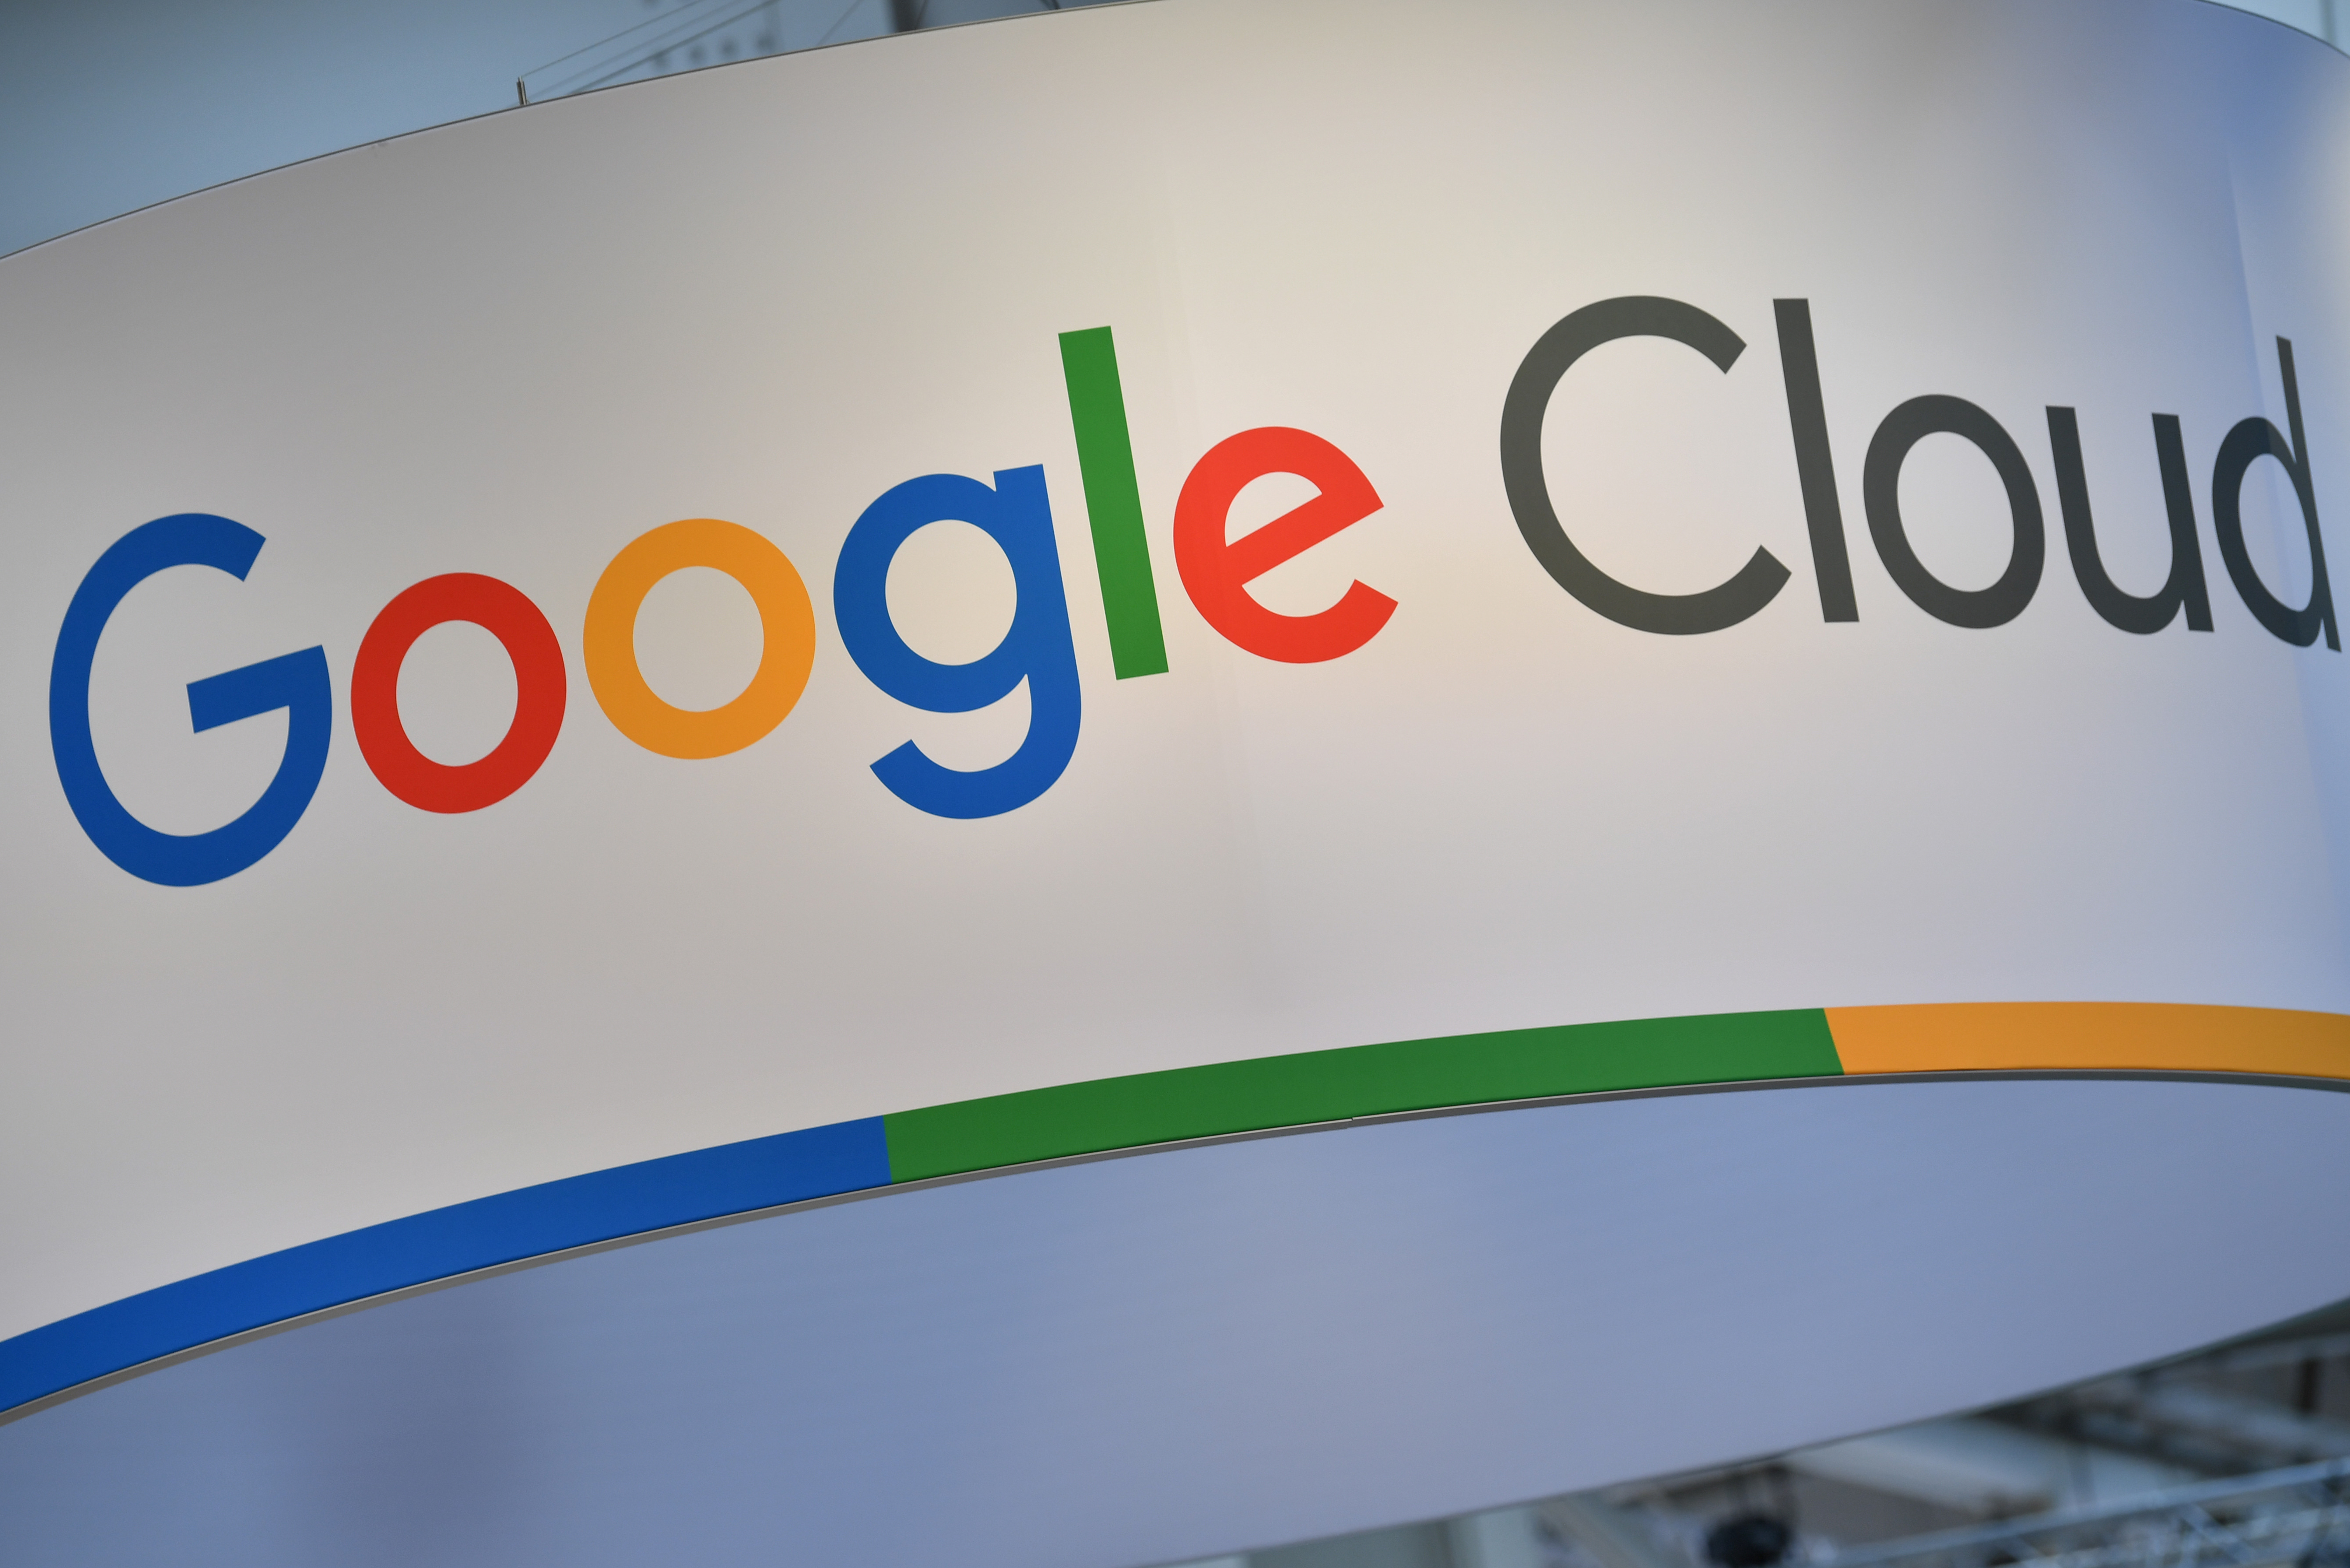 Google has a contract with the Israeli government where it provides the country with cloud computing services. Not all Google employees are happy about that.